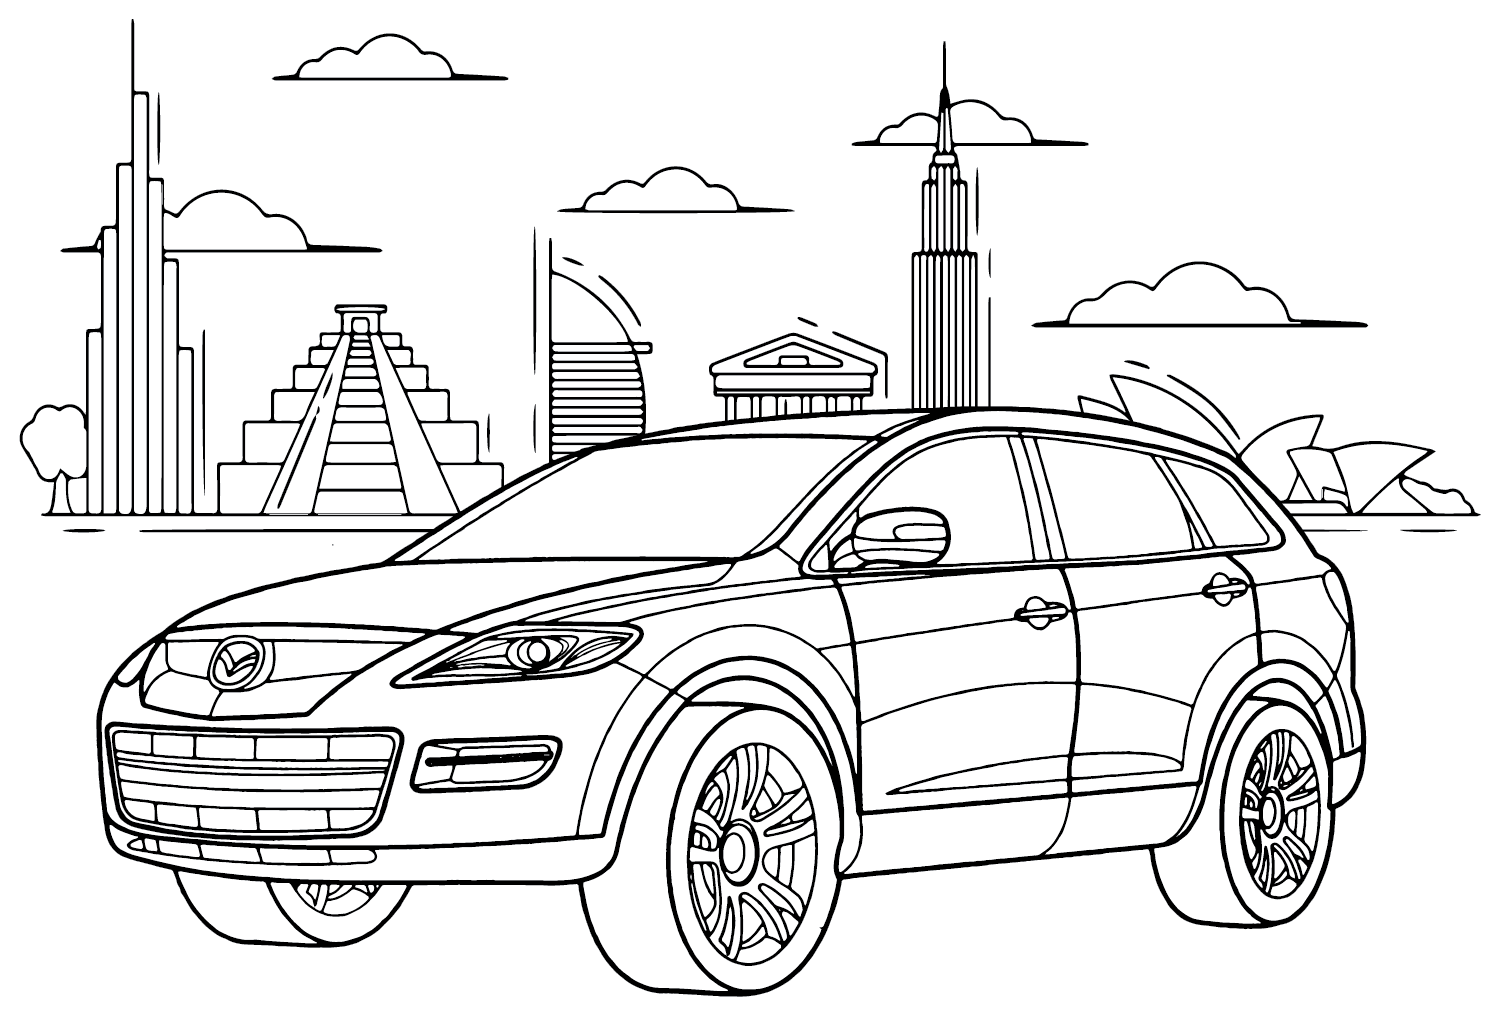 Mazda CX-9 Coloring Page to Print from Mazda